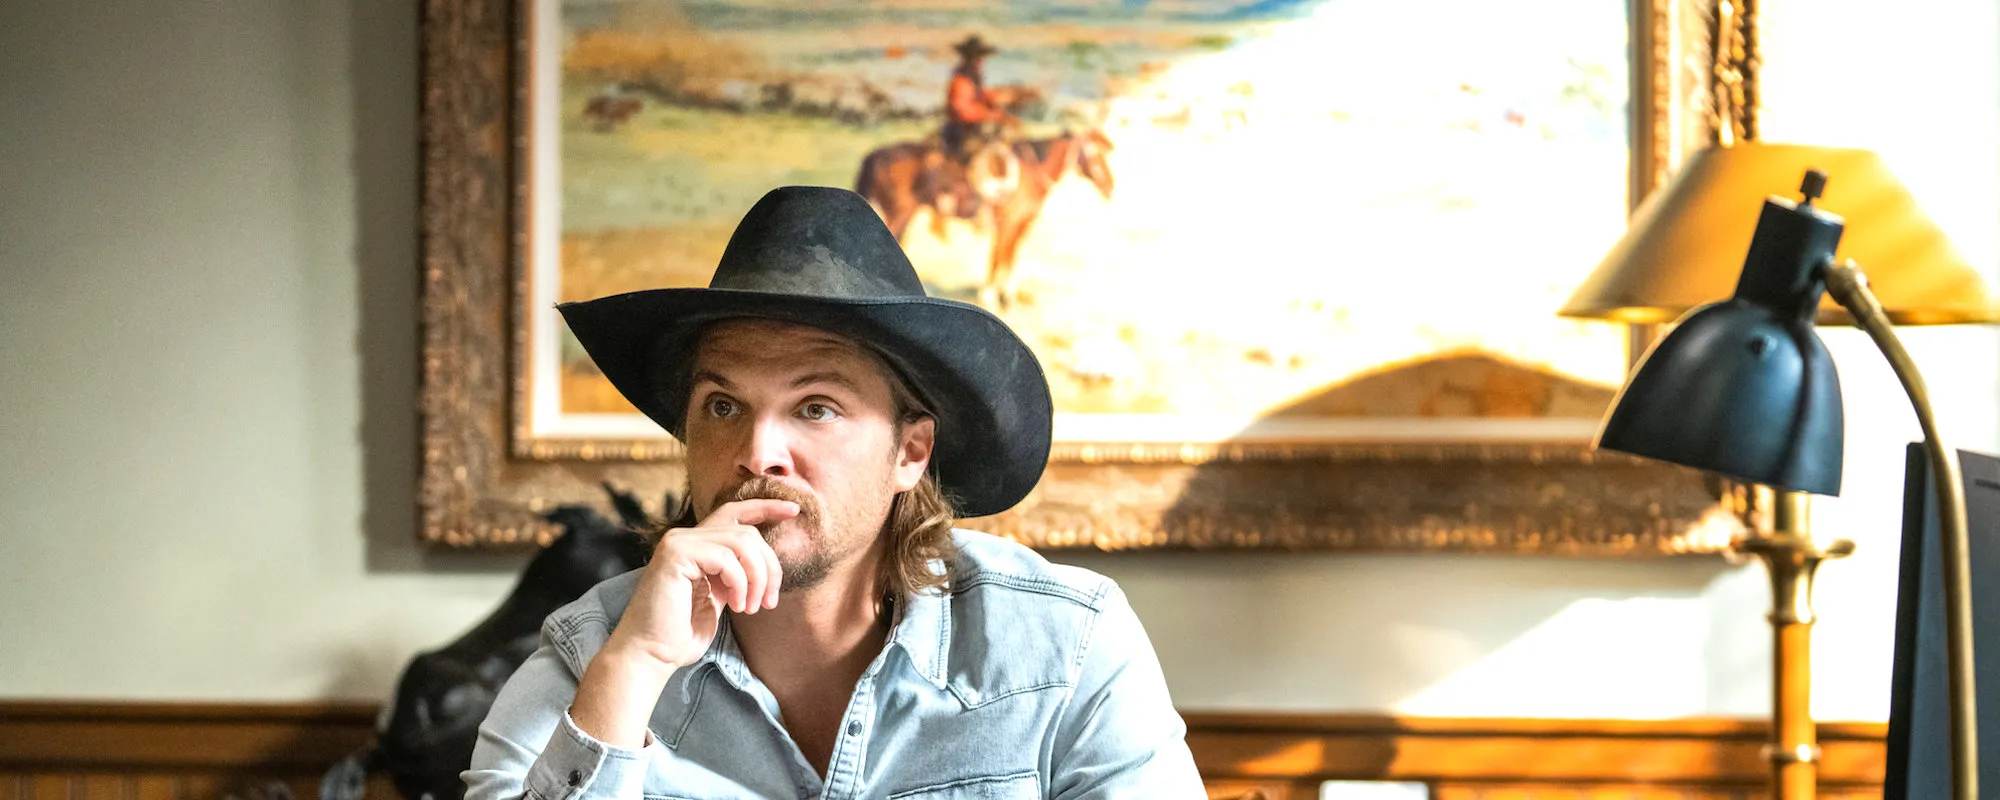 ‘Yellowstone’ Star Luke Grimes Teases Debut Single “No Horse to Ride,” Reveals Debut Album